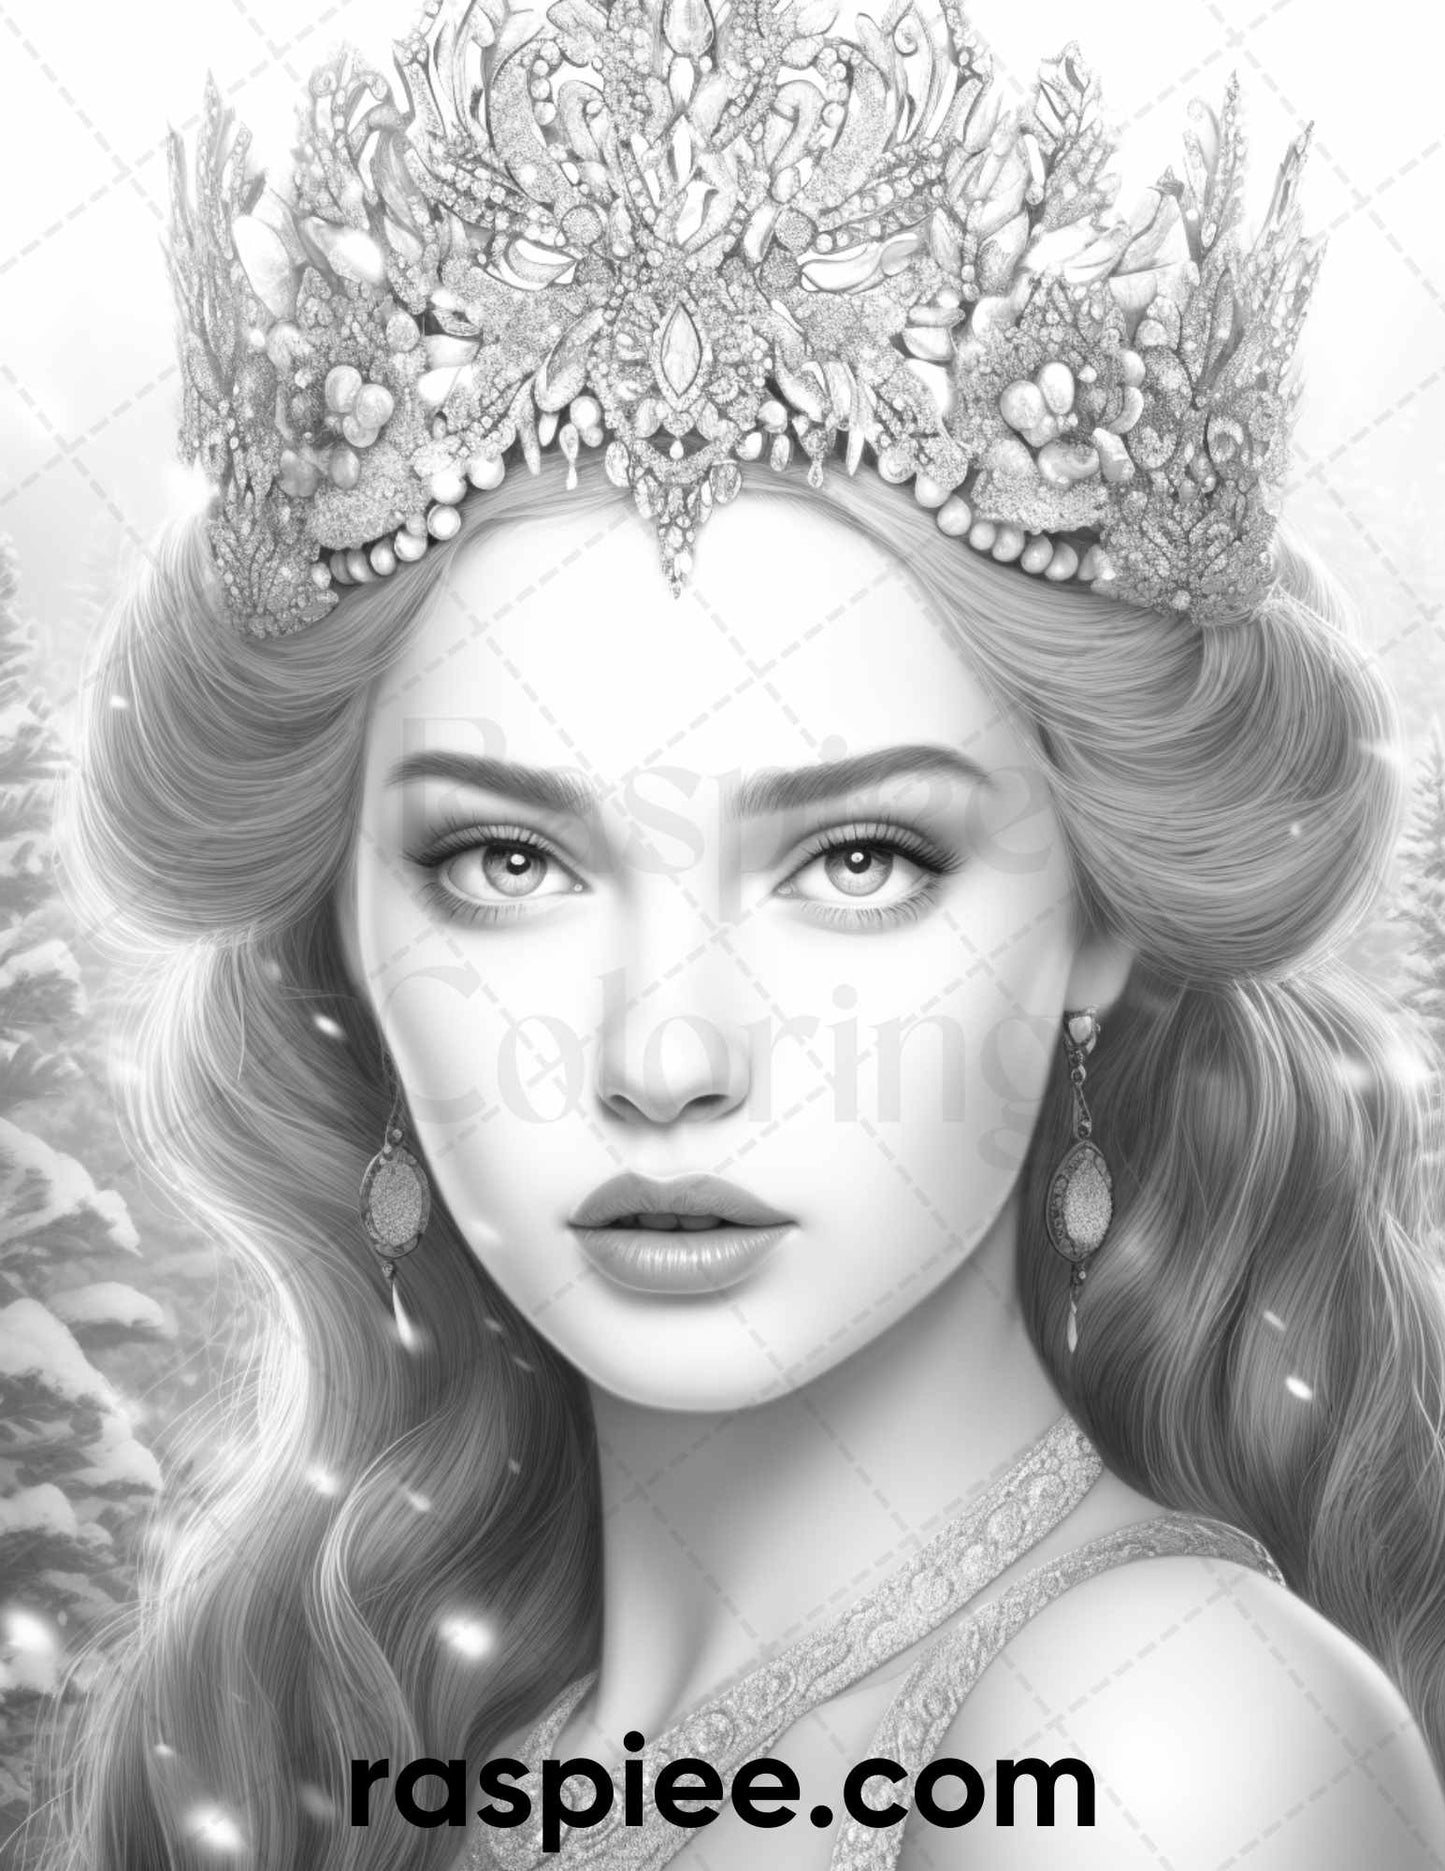 Winter Queens Coloring Page, Grayscale Queen Portraits, Adult Coloring Printable, Detailed Winter Designs, Snow Queen Art, Stress Relief Coloring, Intricate Coloring Sheet, Relaxation Coloring Art, Winter Season Coloring Pages, Portrait Coloring Pages, Christmas Coloring Pages, Xmas Coloring Pages